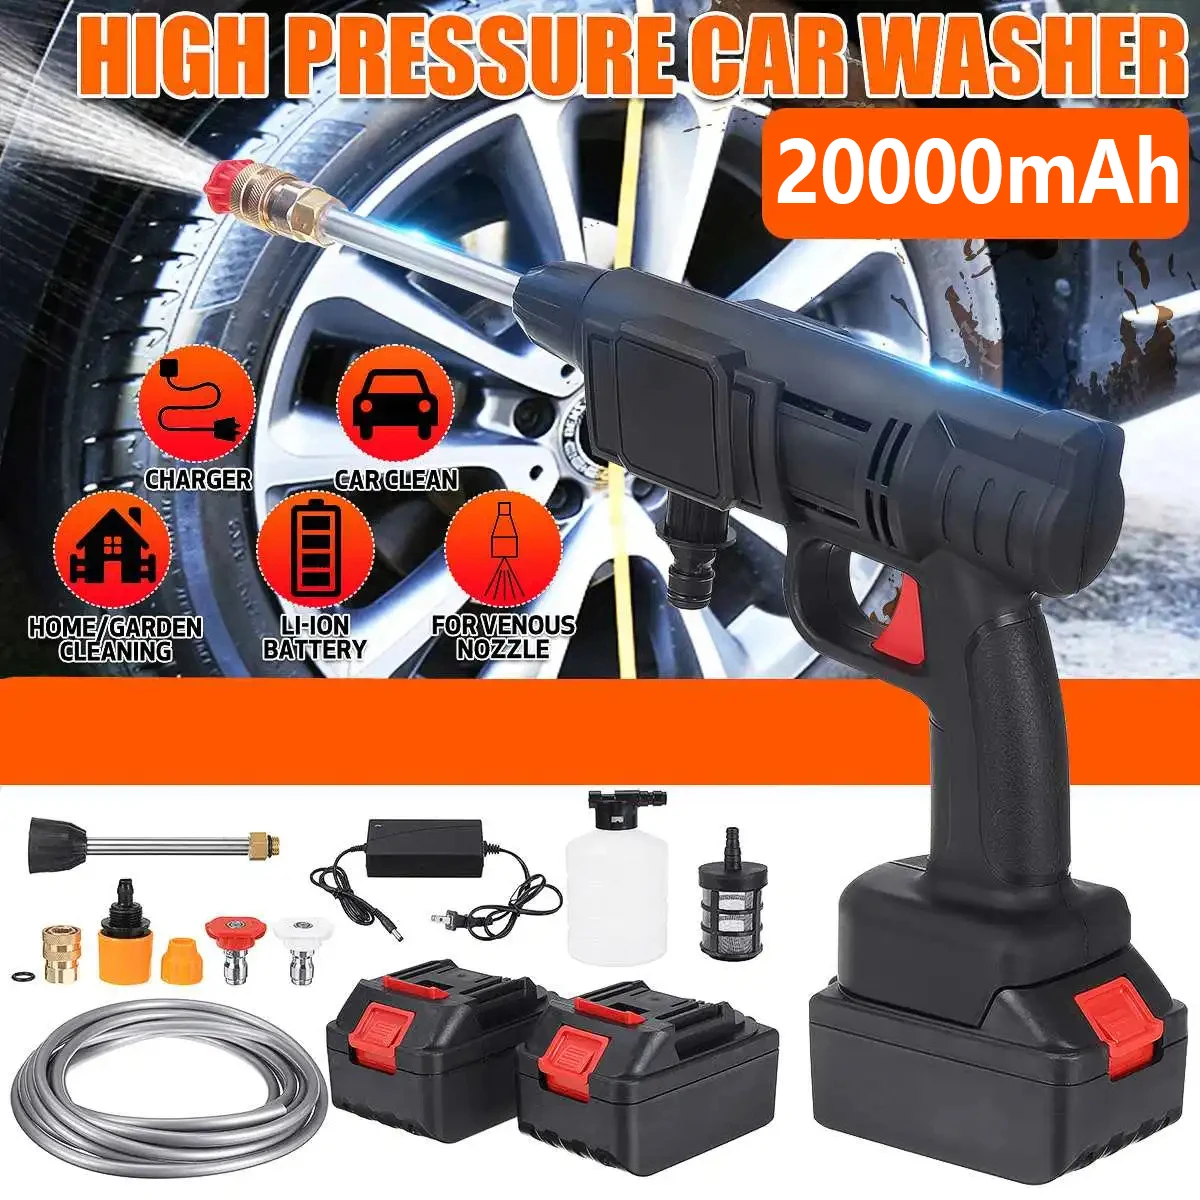 

20000mAh Cordless Pressure Washer 240W 60Bar Nozzle High Pressure Washer for Car Garden Cleaning Car Washing Machine Tools